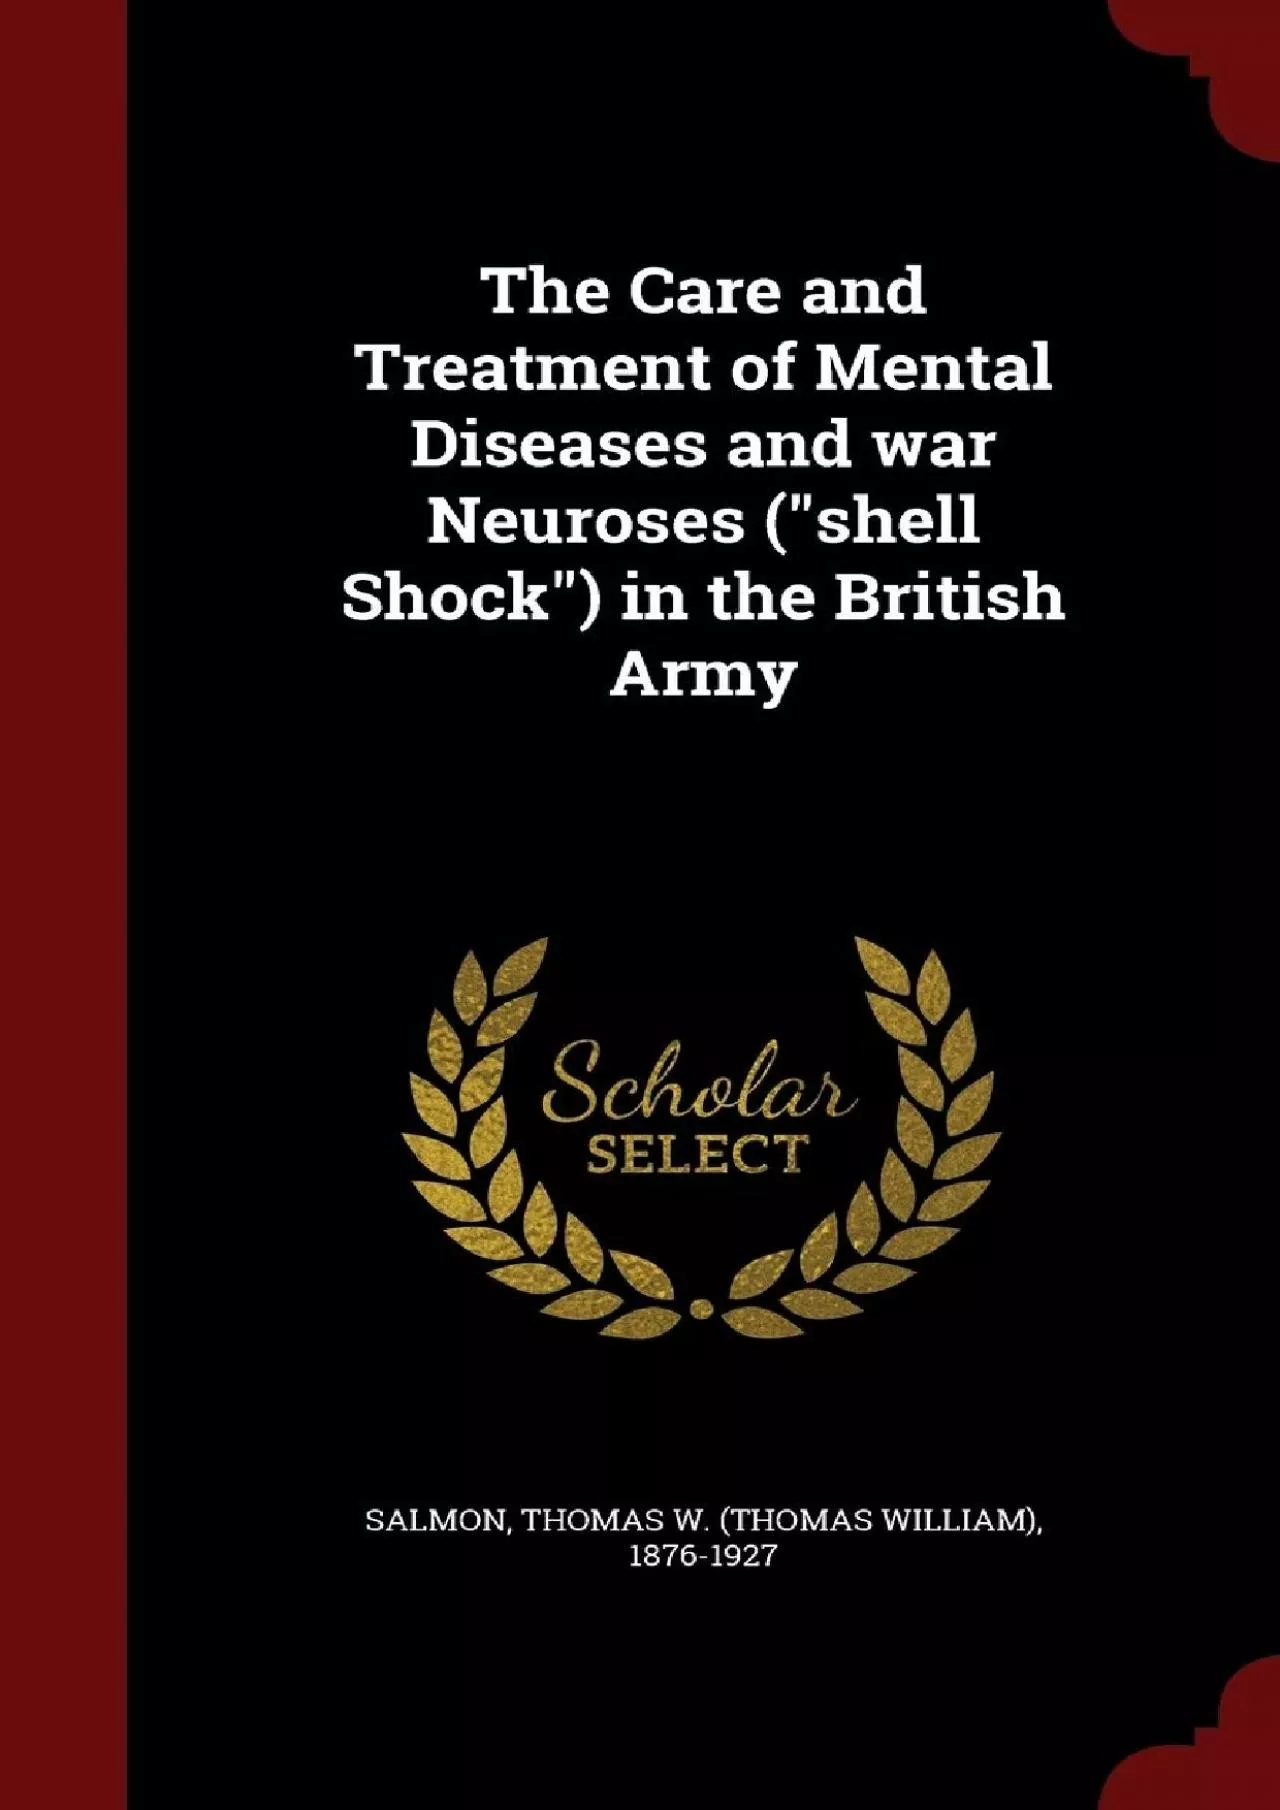 (BOOK)-The Care and Treatment of Mental Diseases and war Neuroses (shell Shock) in the